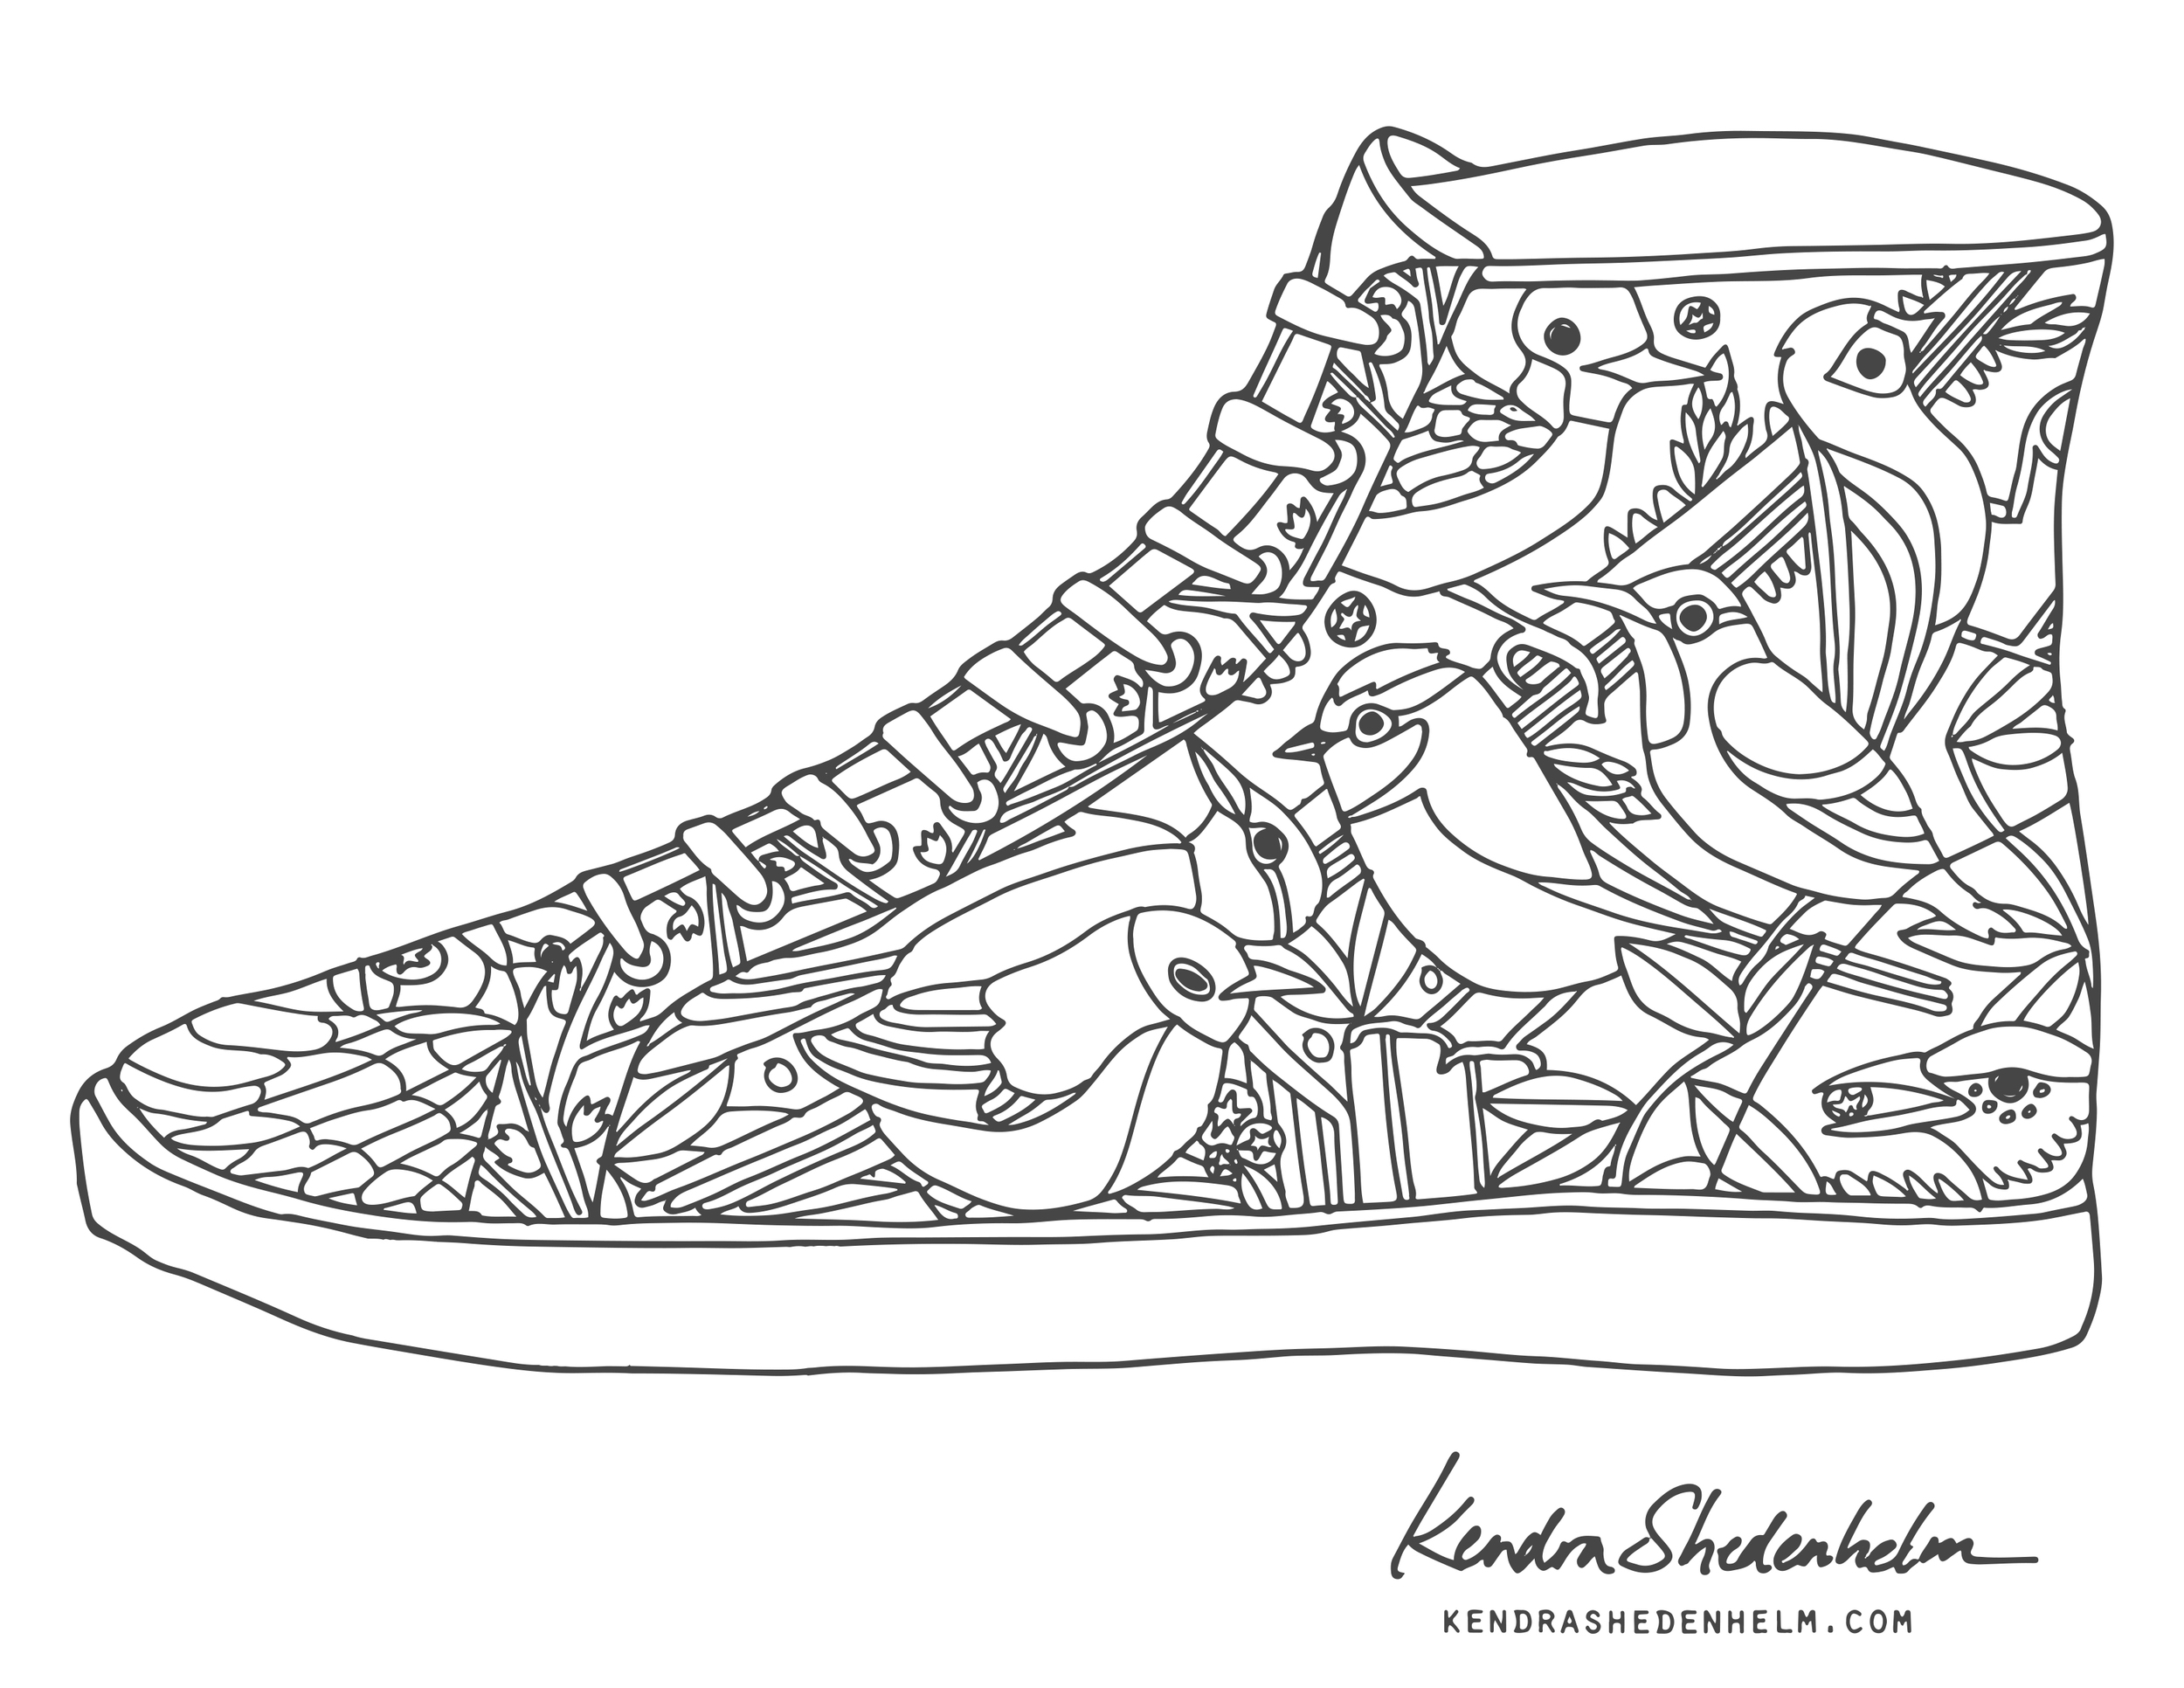 Birds, doodles, shoes and FREE coloring pages — Kendra Shedenhelm